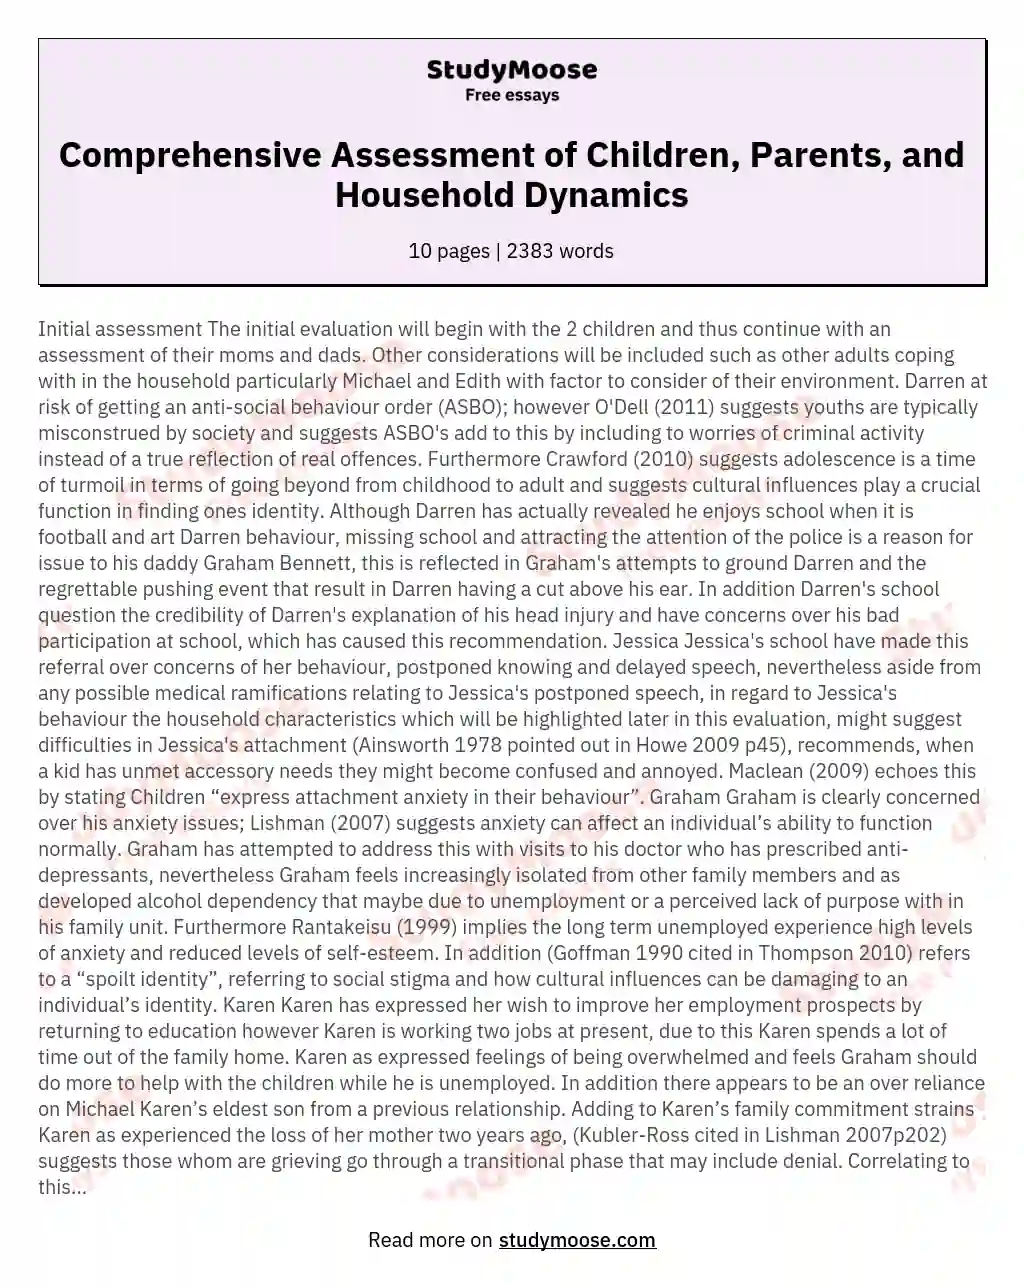 Comprehensive Assessment of Children, Parents, and Household Dynamics